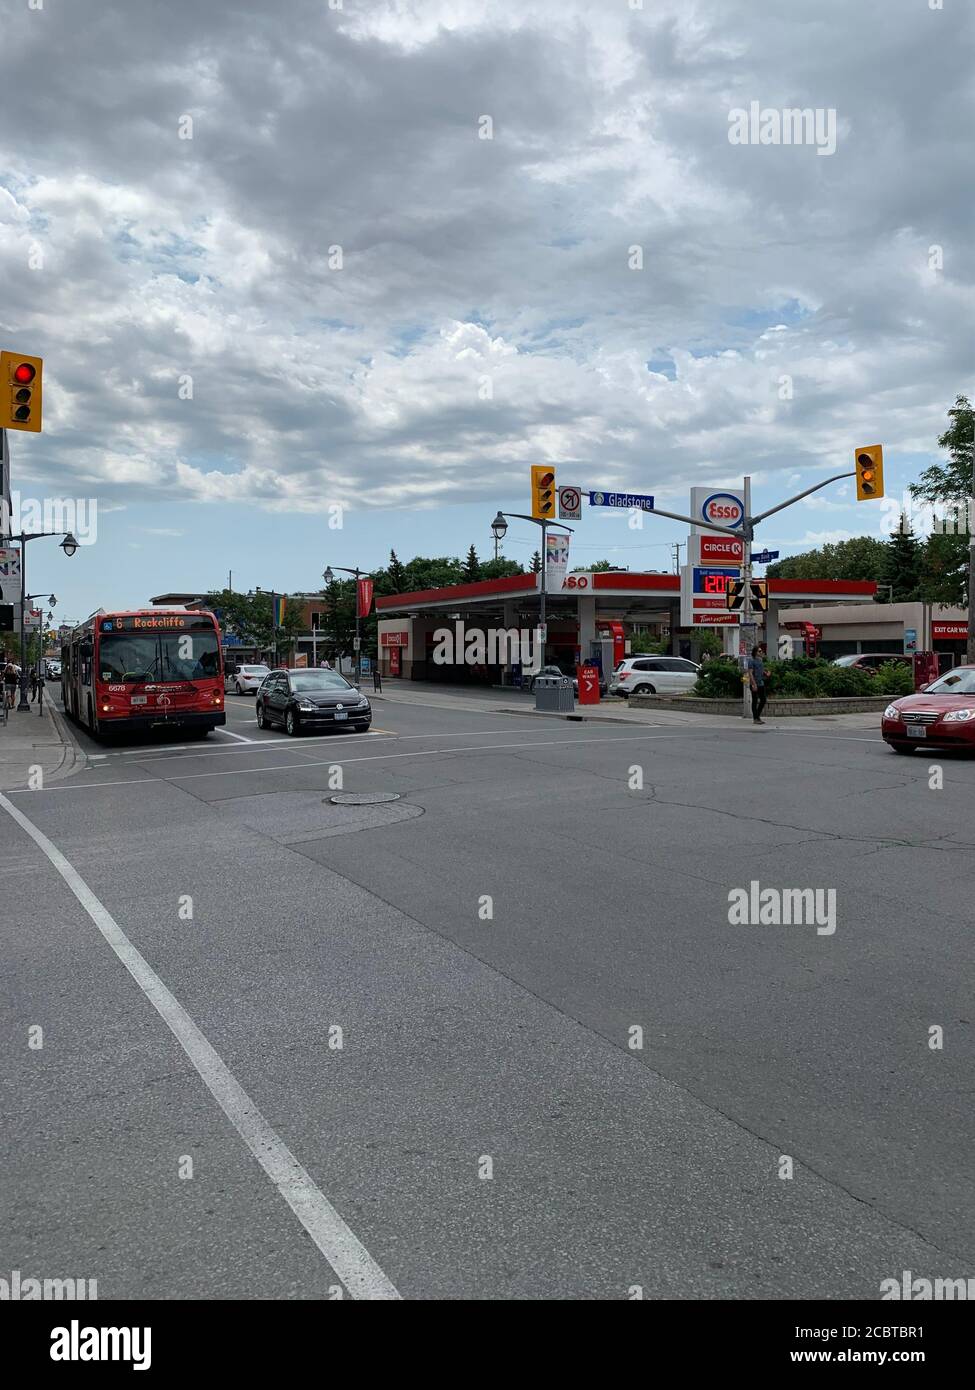 Esso gas station and traffic at intersection of Gladstone and Bank streets. Ottawa, Ontario / Canada. Stock Photo